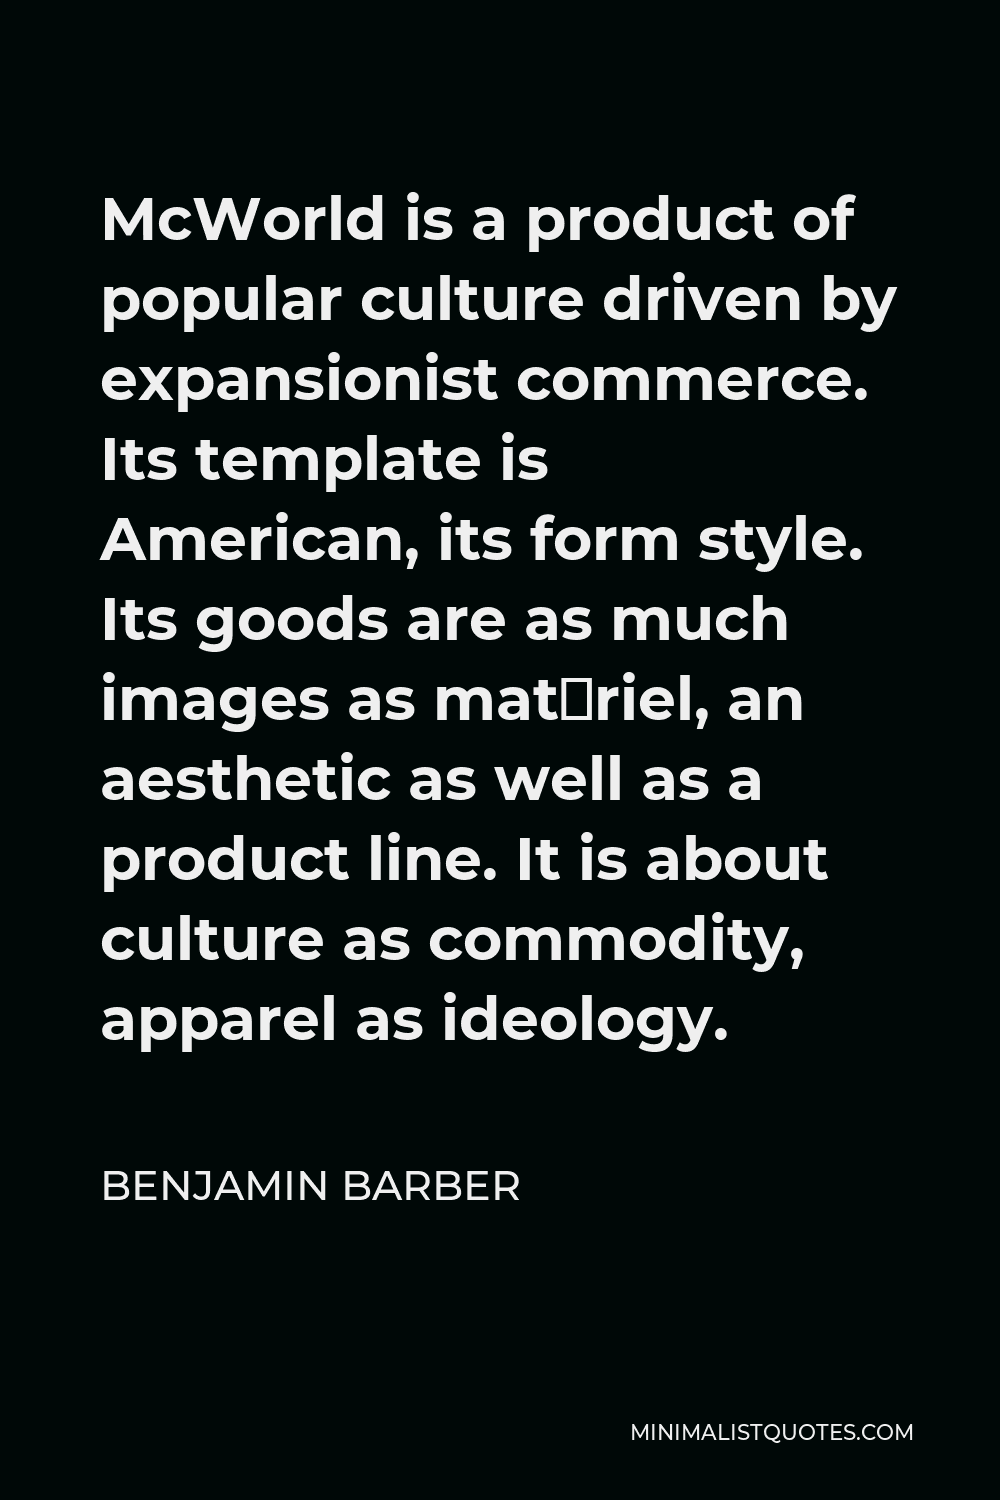 Benjamin Barber Quote - McWorld is a product of popular culture driven by expansionist commerce. Its template is American, its form style. Its goods are as much images as matériel, an aesthetic as well as a product line. It is about culture as commodity, apparel as ideology.